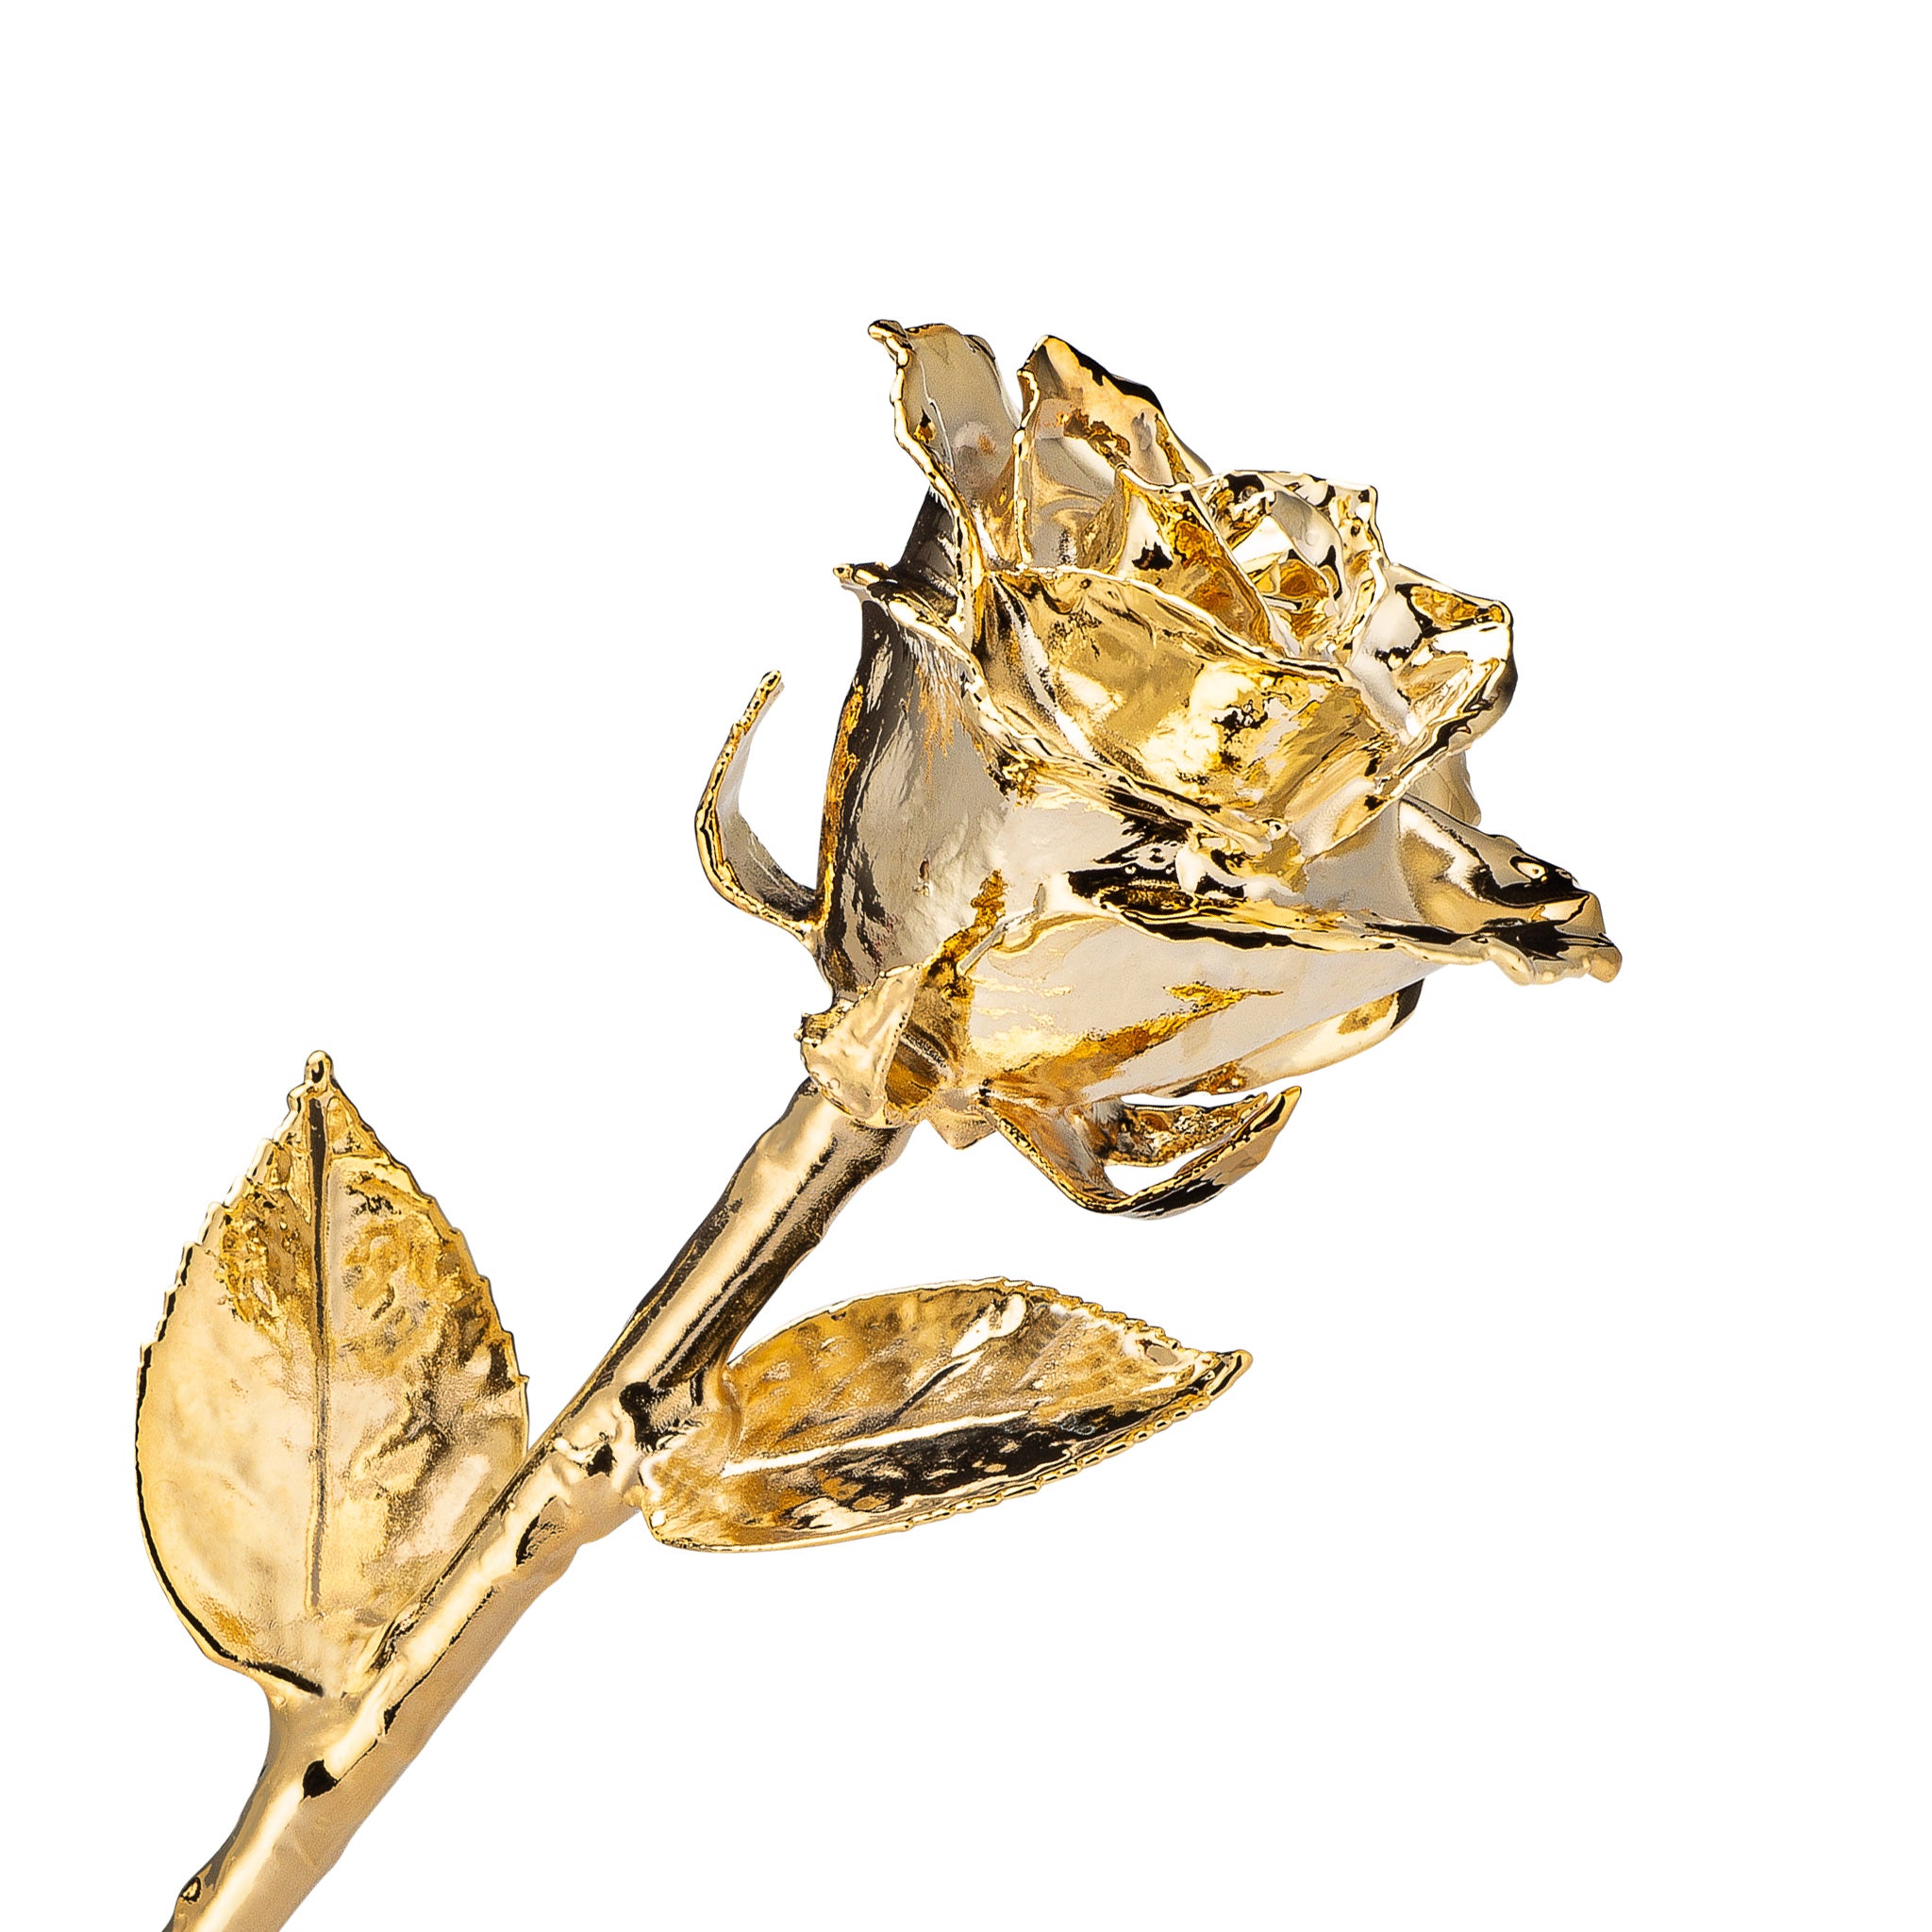 24K Gold Dipped Roses: Combo Deal